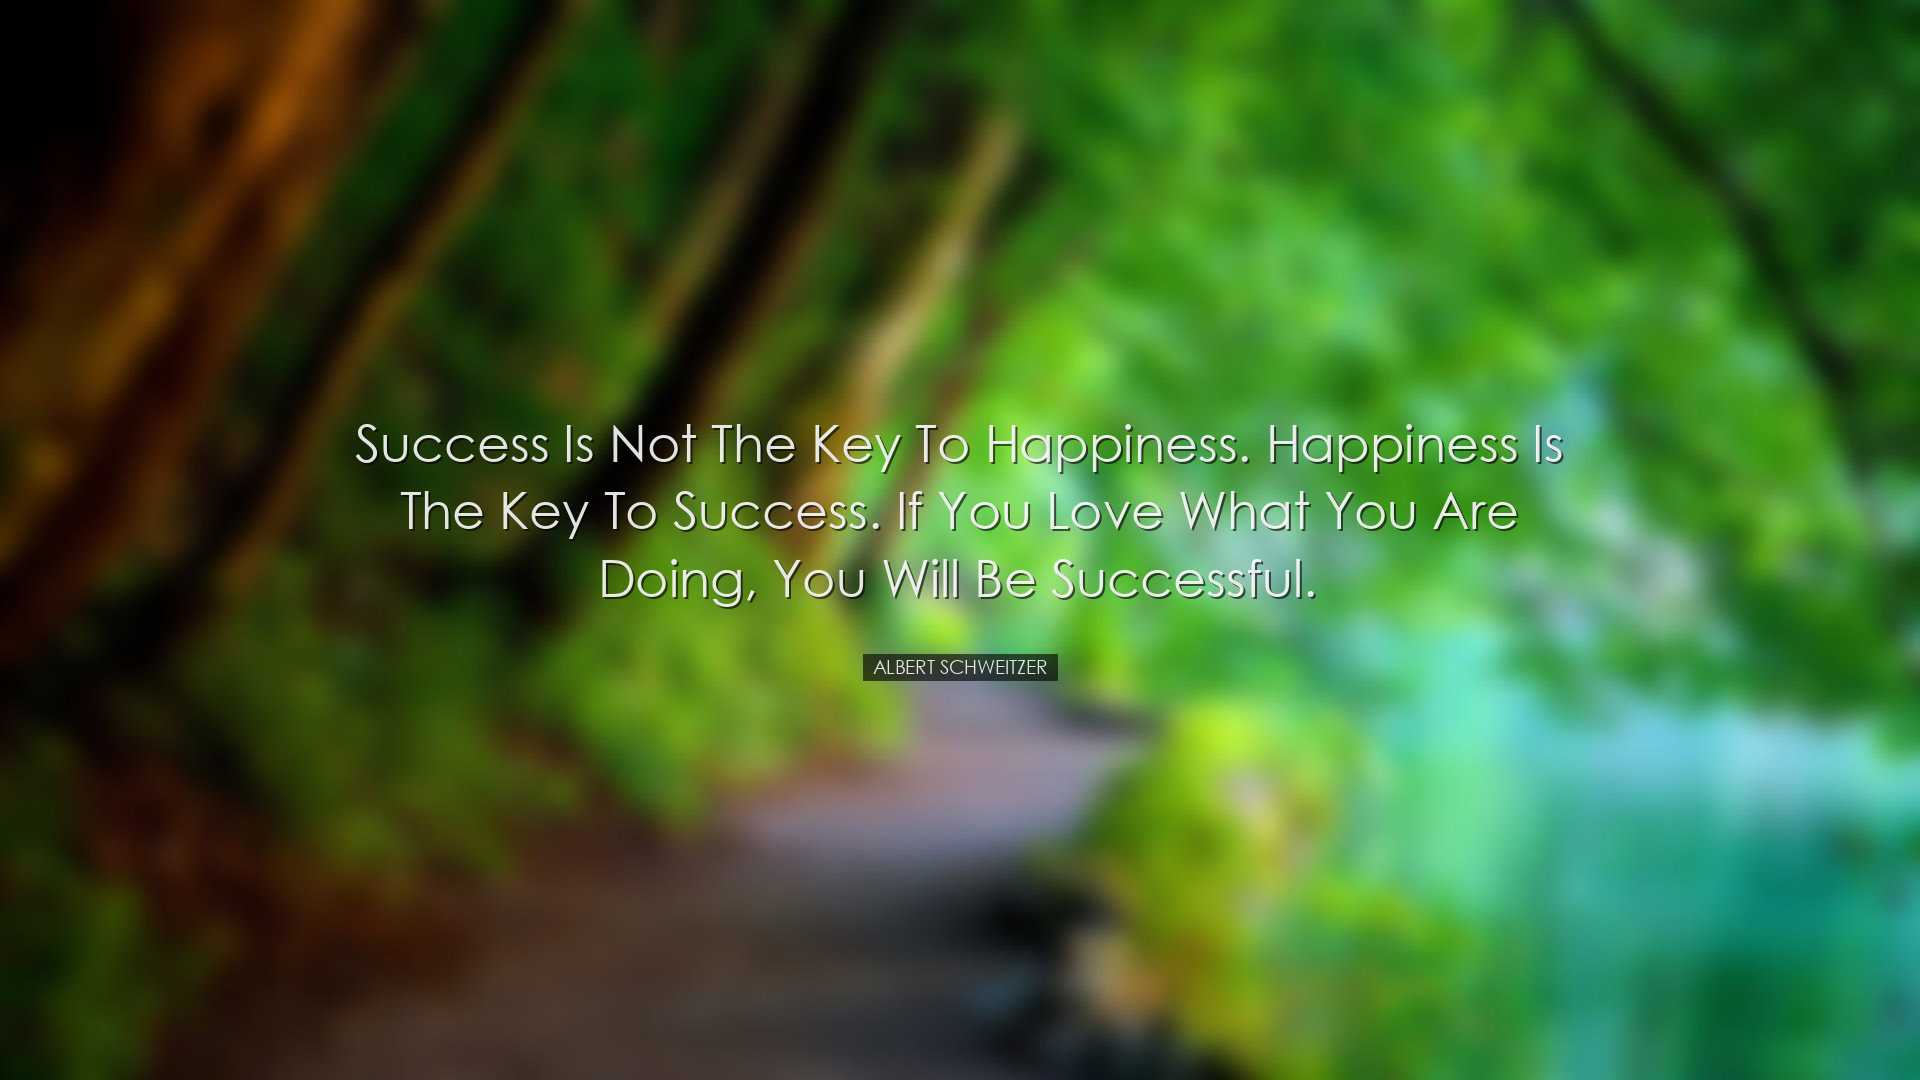 Success is not the key to happiness. Happiness is the key to succe